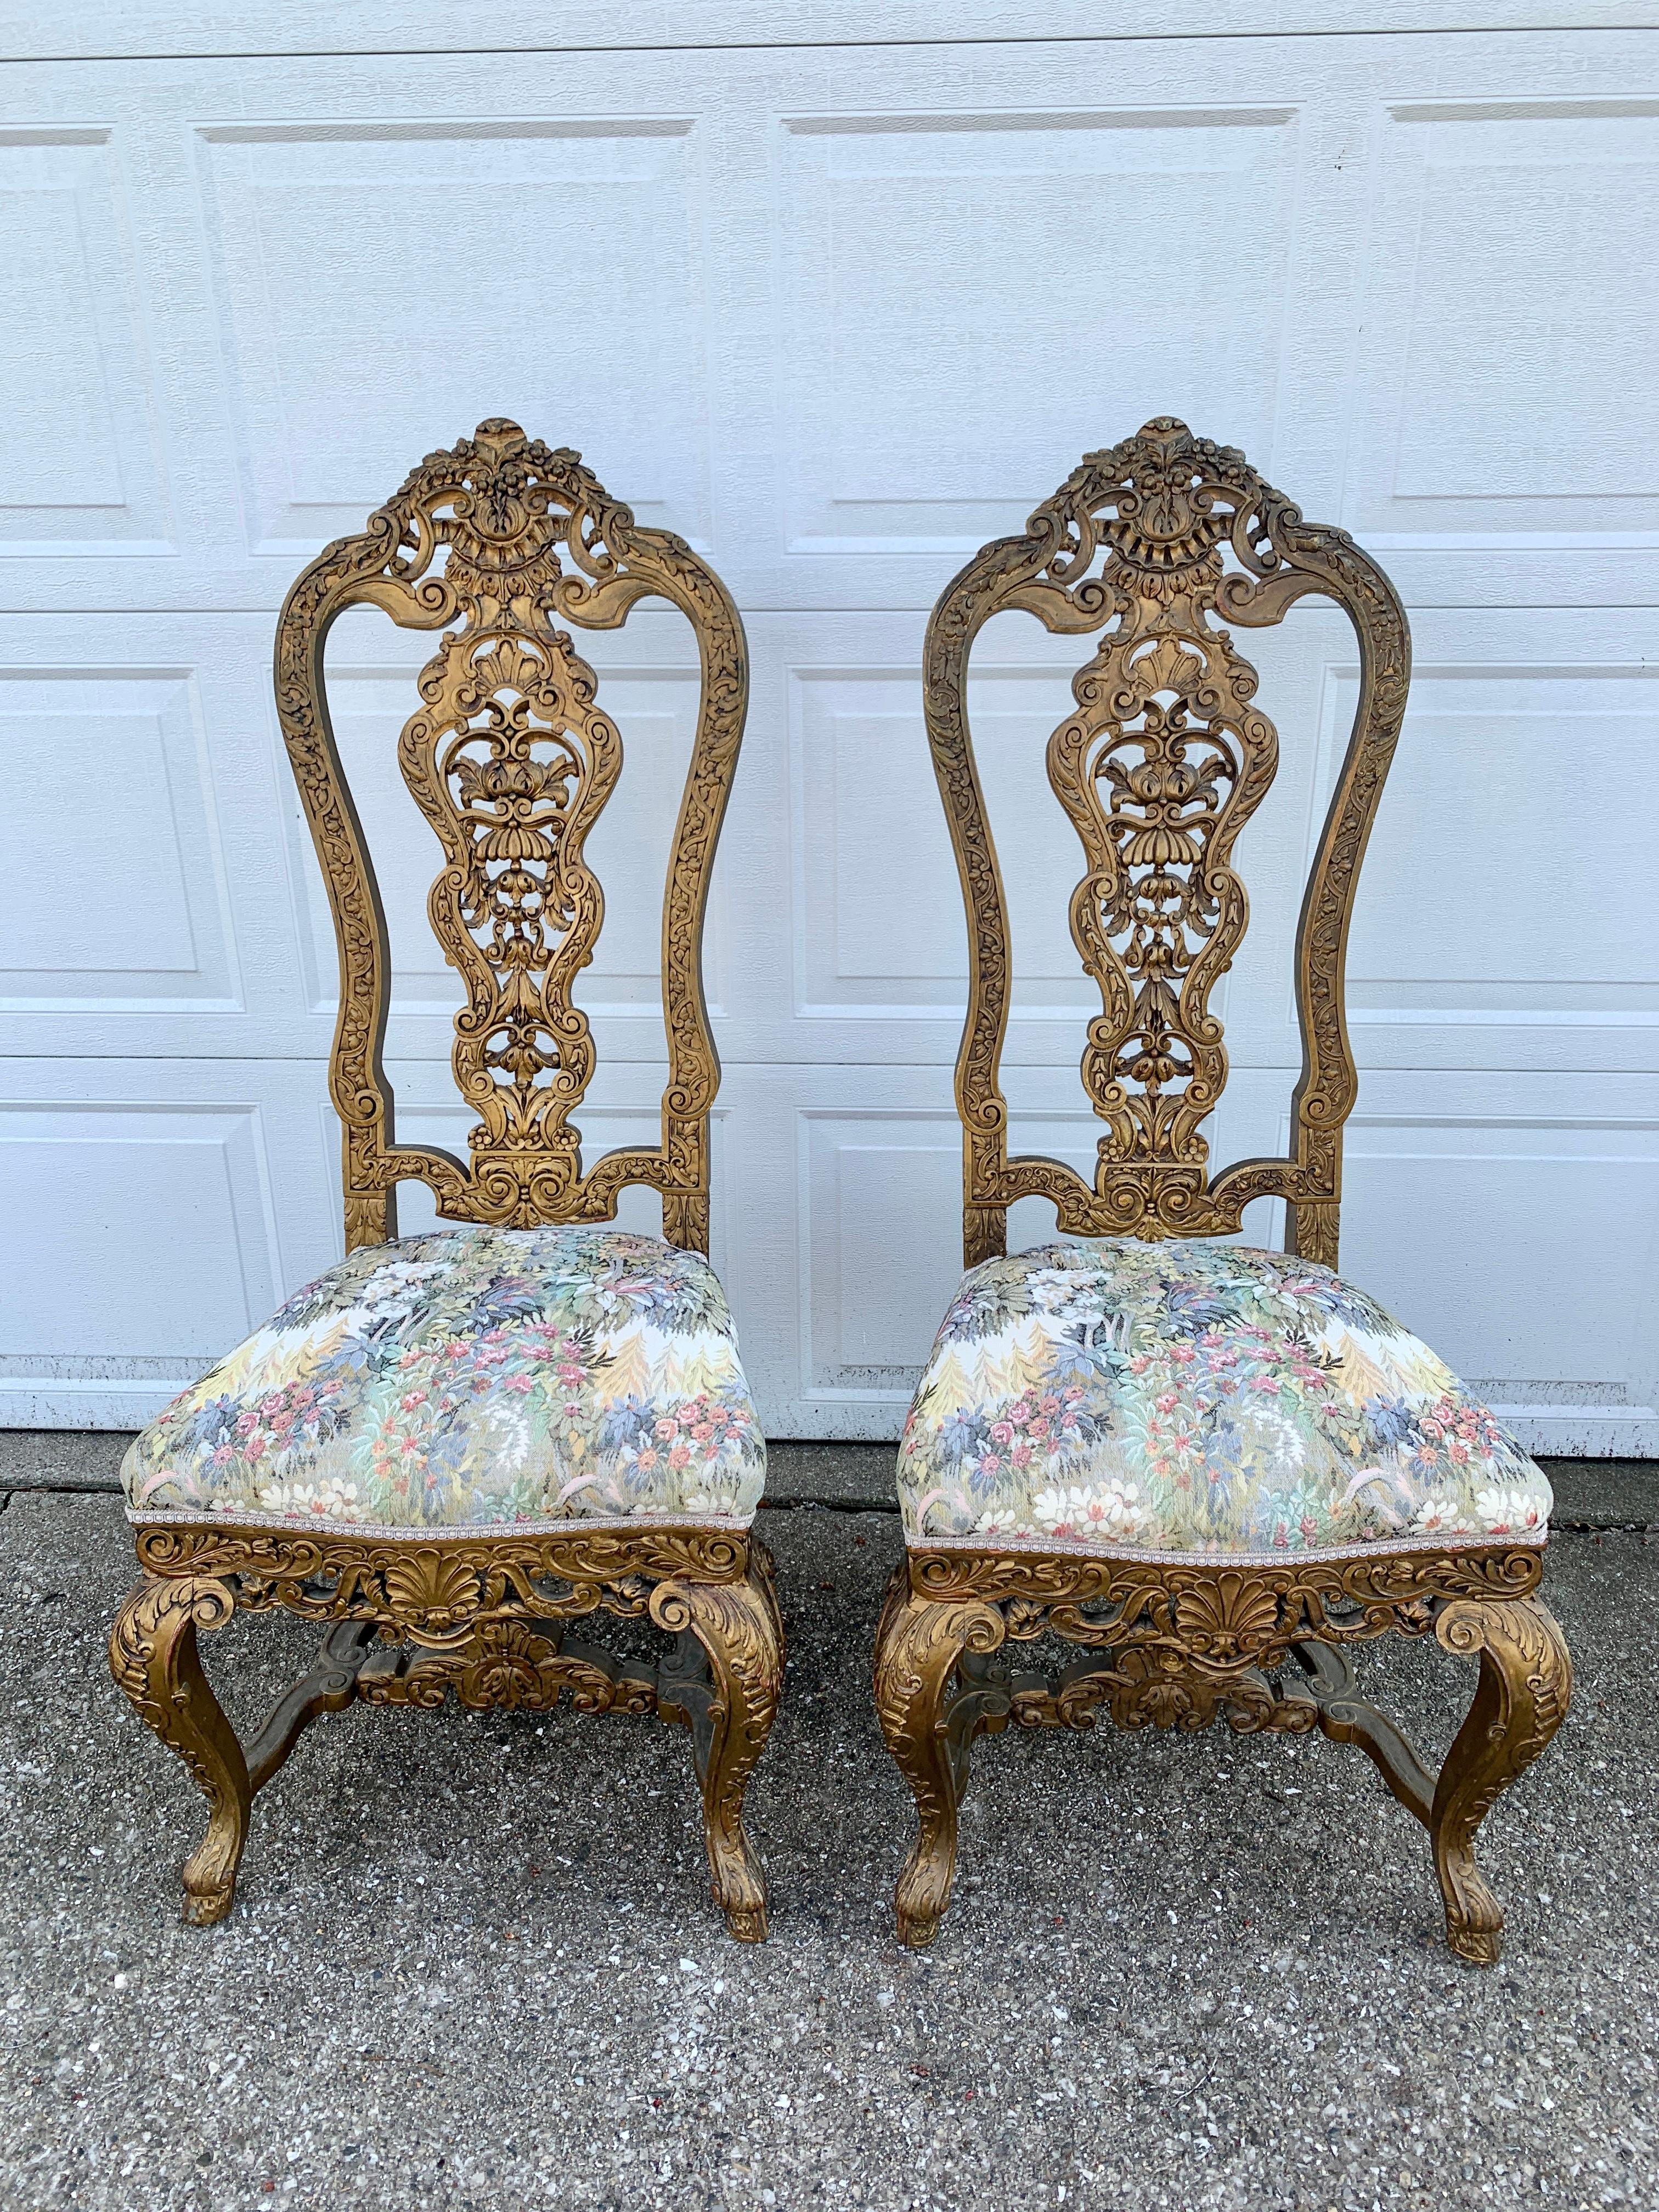 A stunning pair of antique Venetian throne or court chairs with carved shells, foliate details, and cloven hoof feet

Italy, late 19th century

Carved giltwood frames with tapestry upholstery

Measures: 22.25